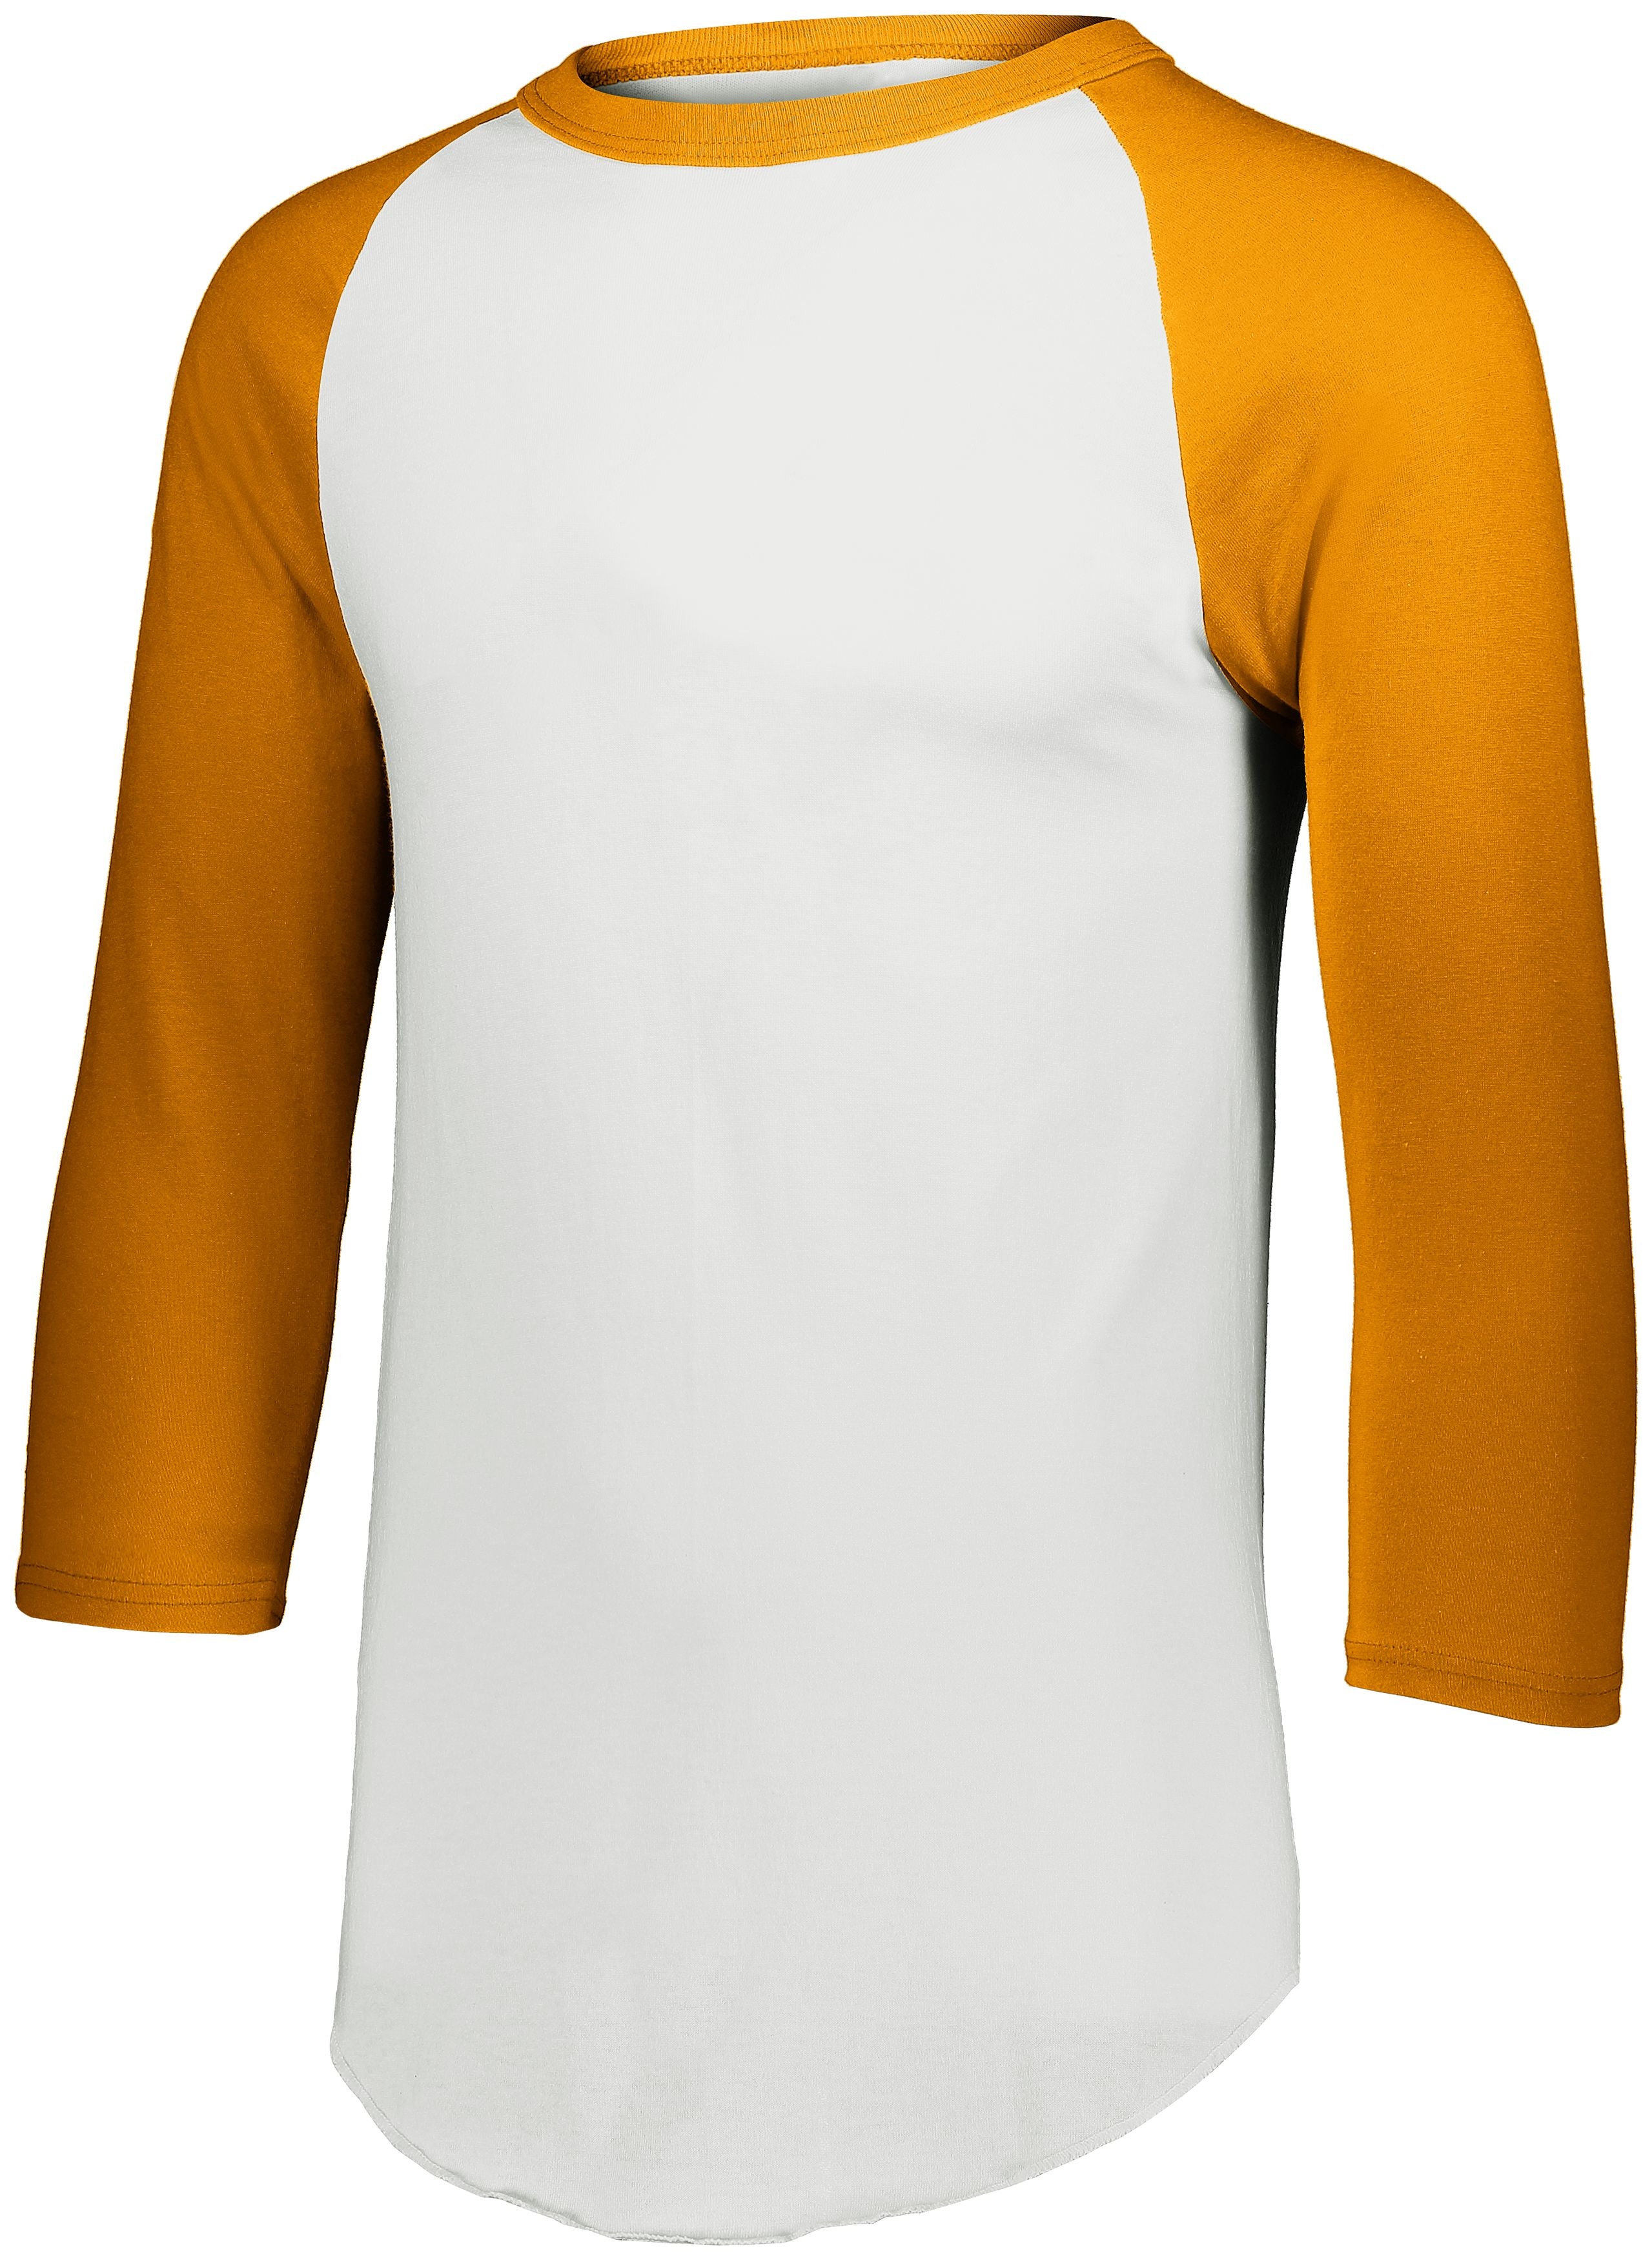 Augusta Sportswear Youth Baseball Jersey 2.0 in White/Gold  -Part of the Youth, Youth-Jersey, Augusta-Products, Baseball, Shirts, All-Sports, All-Sports-1 product lines at KanaleyCreations.com